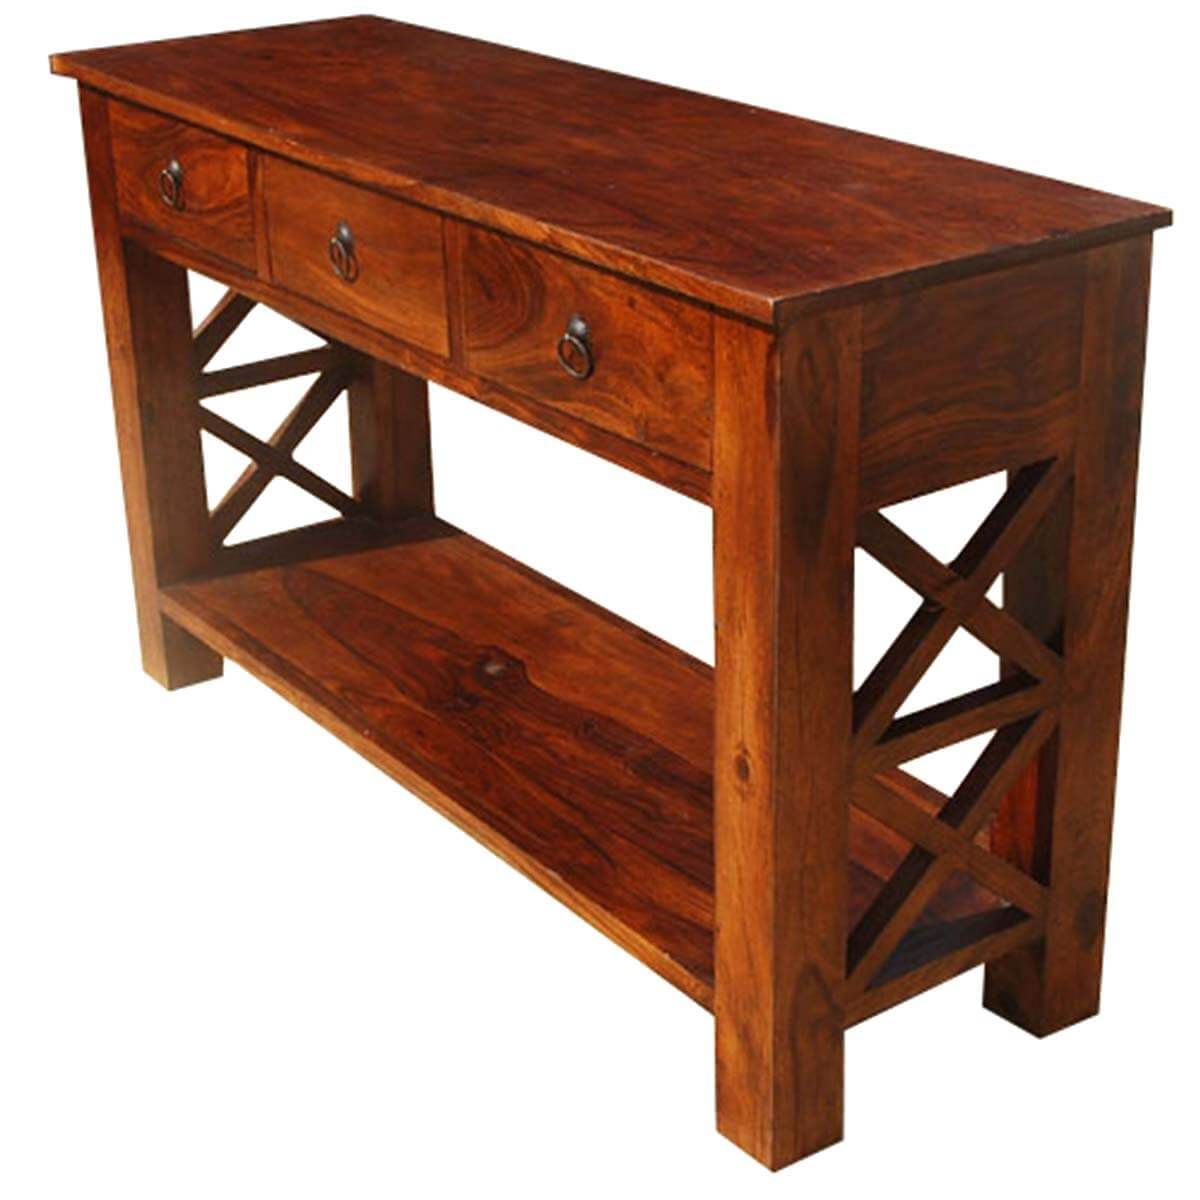 Solid Wood Oklahoma Farmhouse Console Table W 3 Storage Intended For Black Wood Storage Console Tables (View 14 of 20)